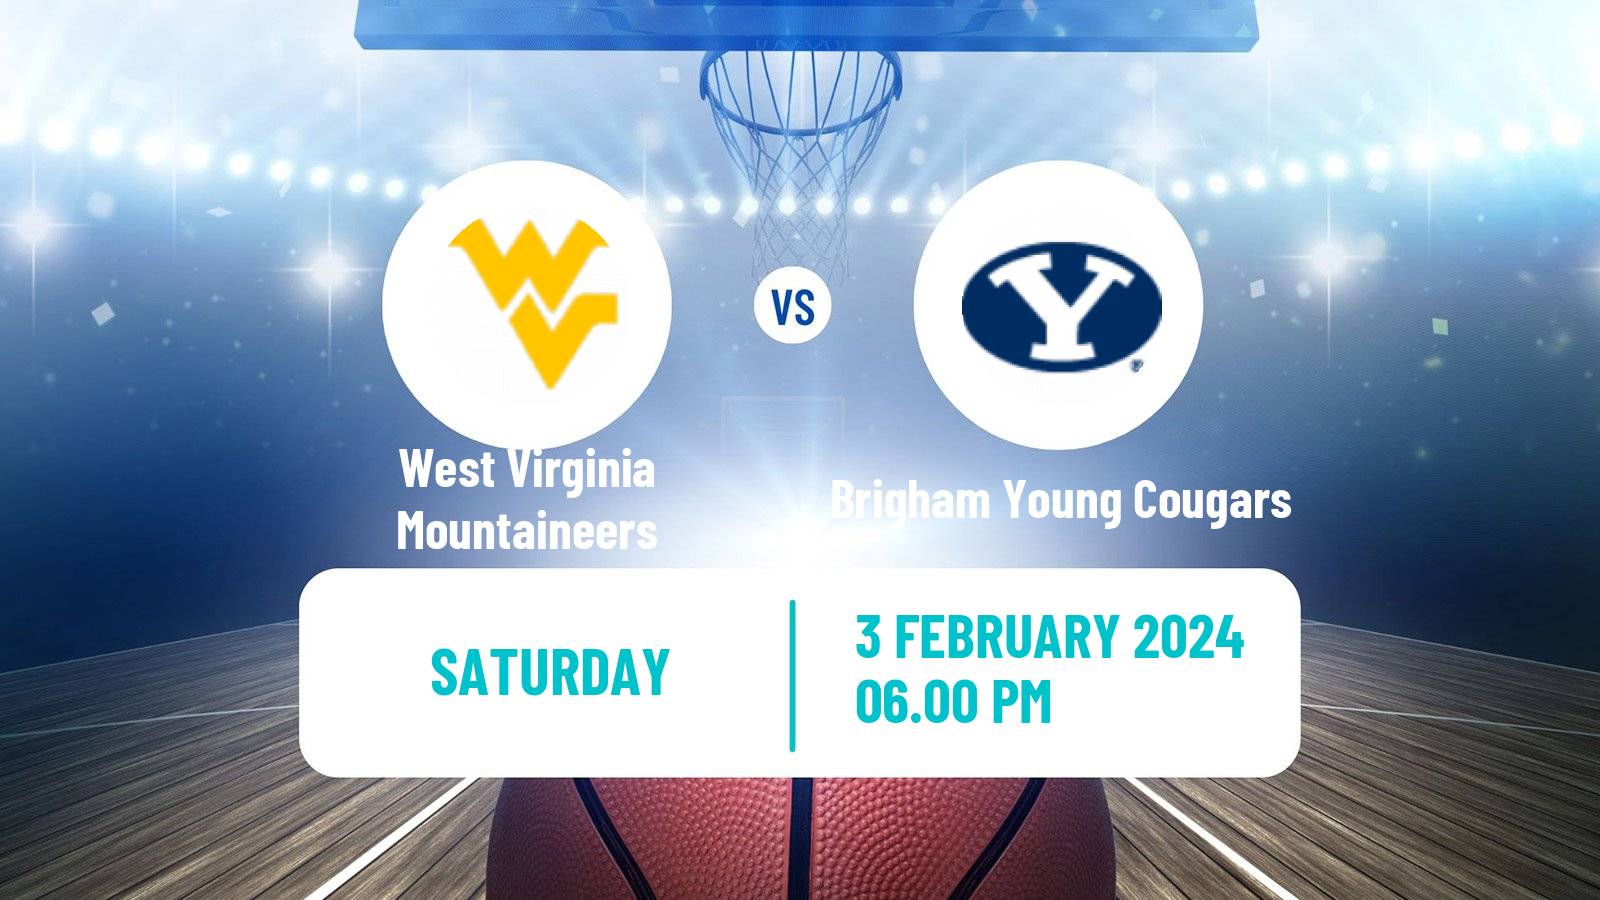 Basketball NCAA College Basketball West Virginia Mountaineers - Brigham Young Cougars